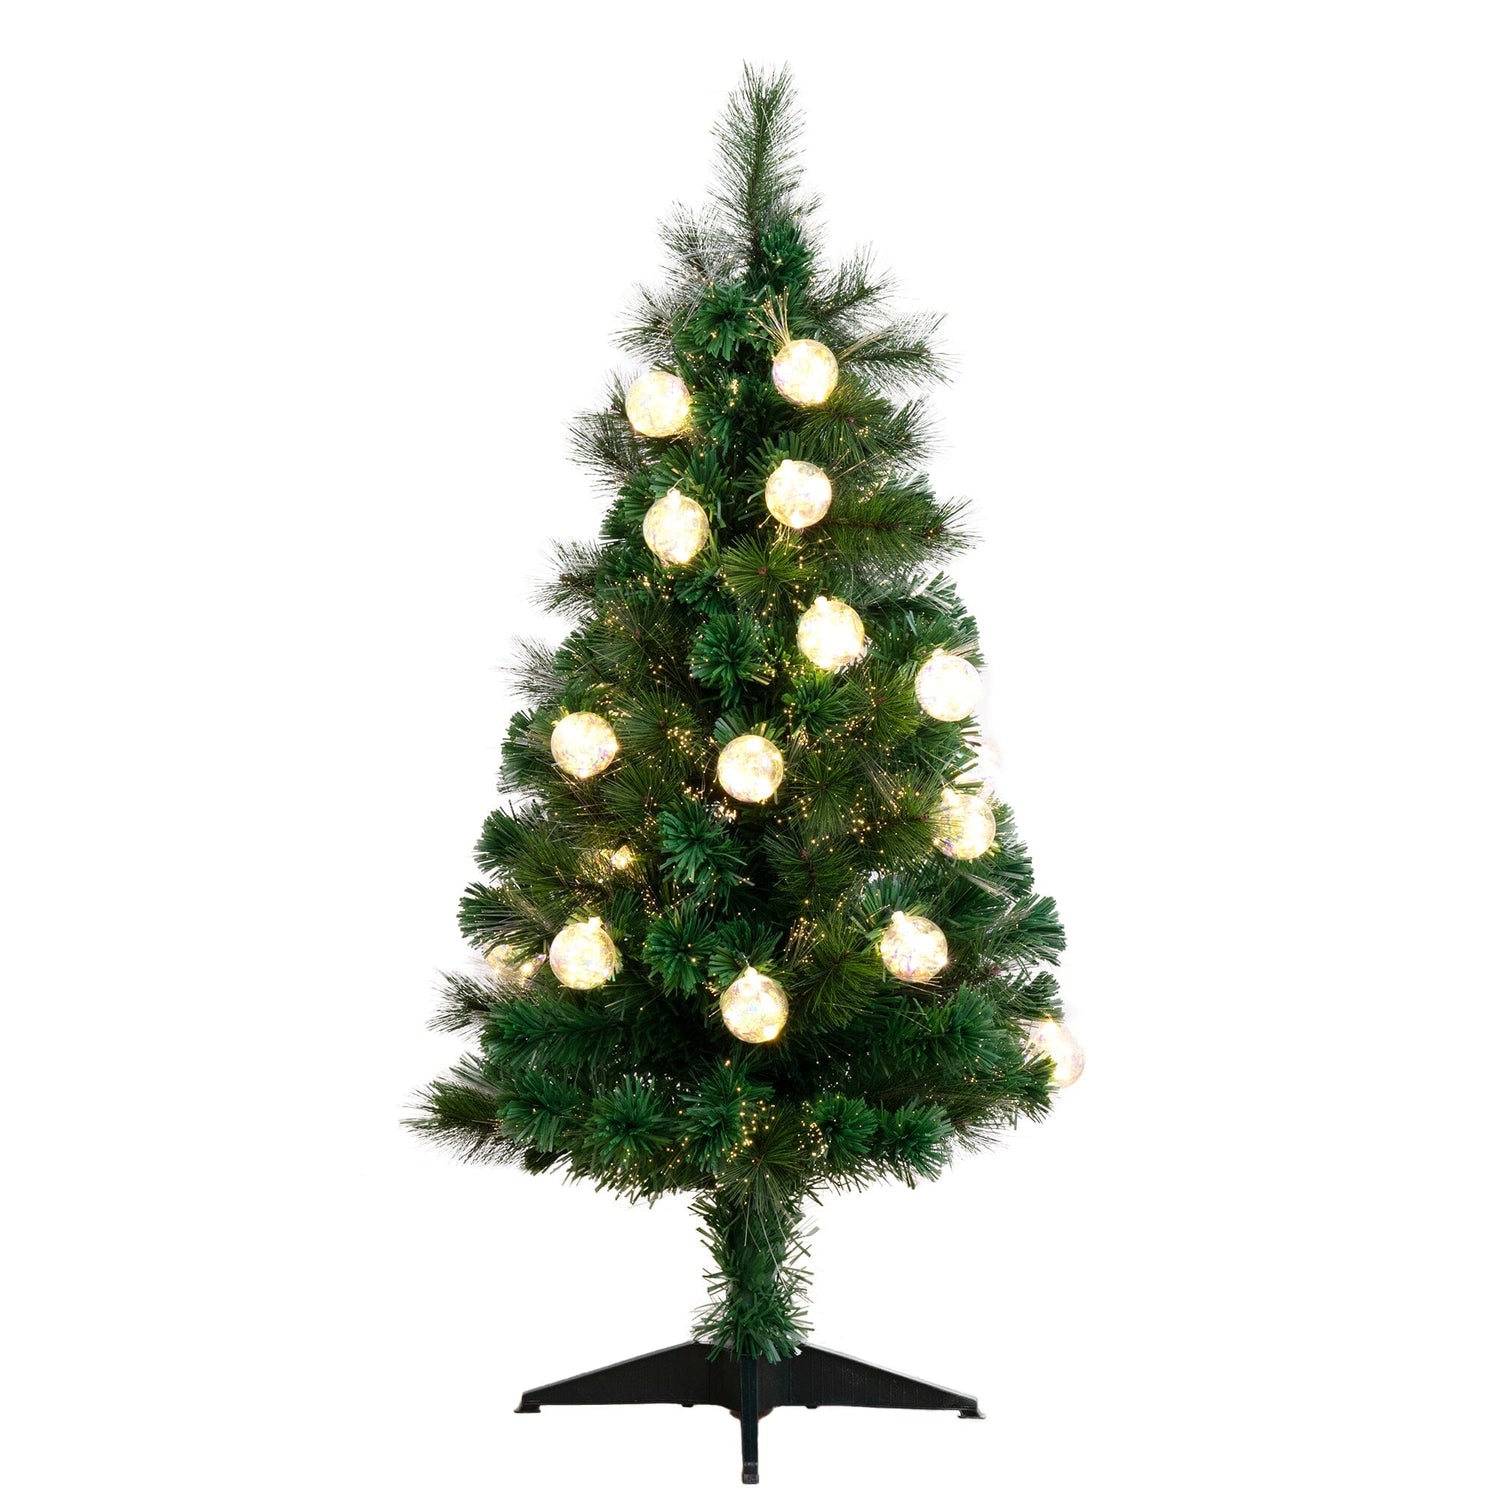 4' Pre-Lit Fiber Optic Artificial Christmas Tree with Mixed Tips and 37 LED Warm White Lights